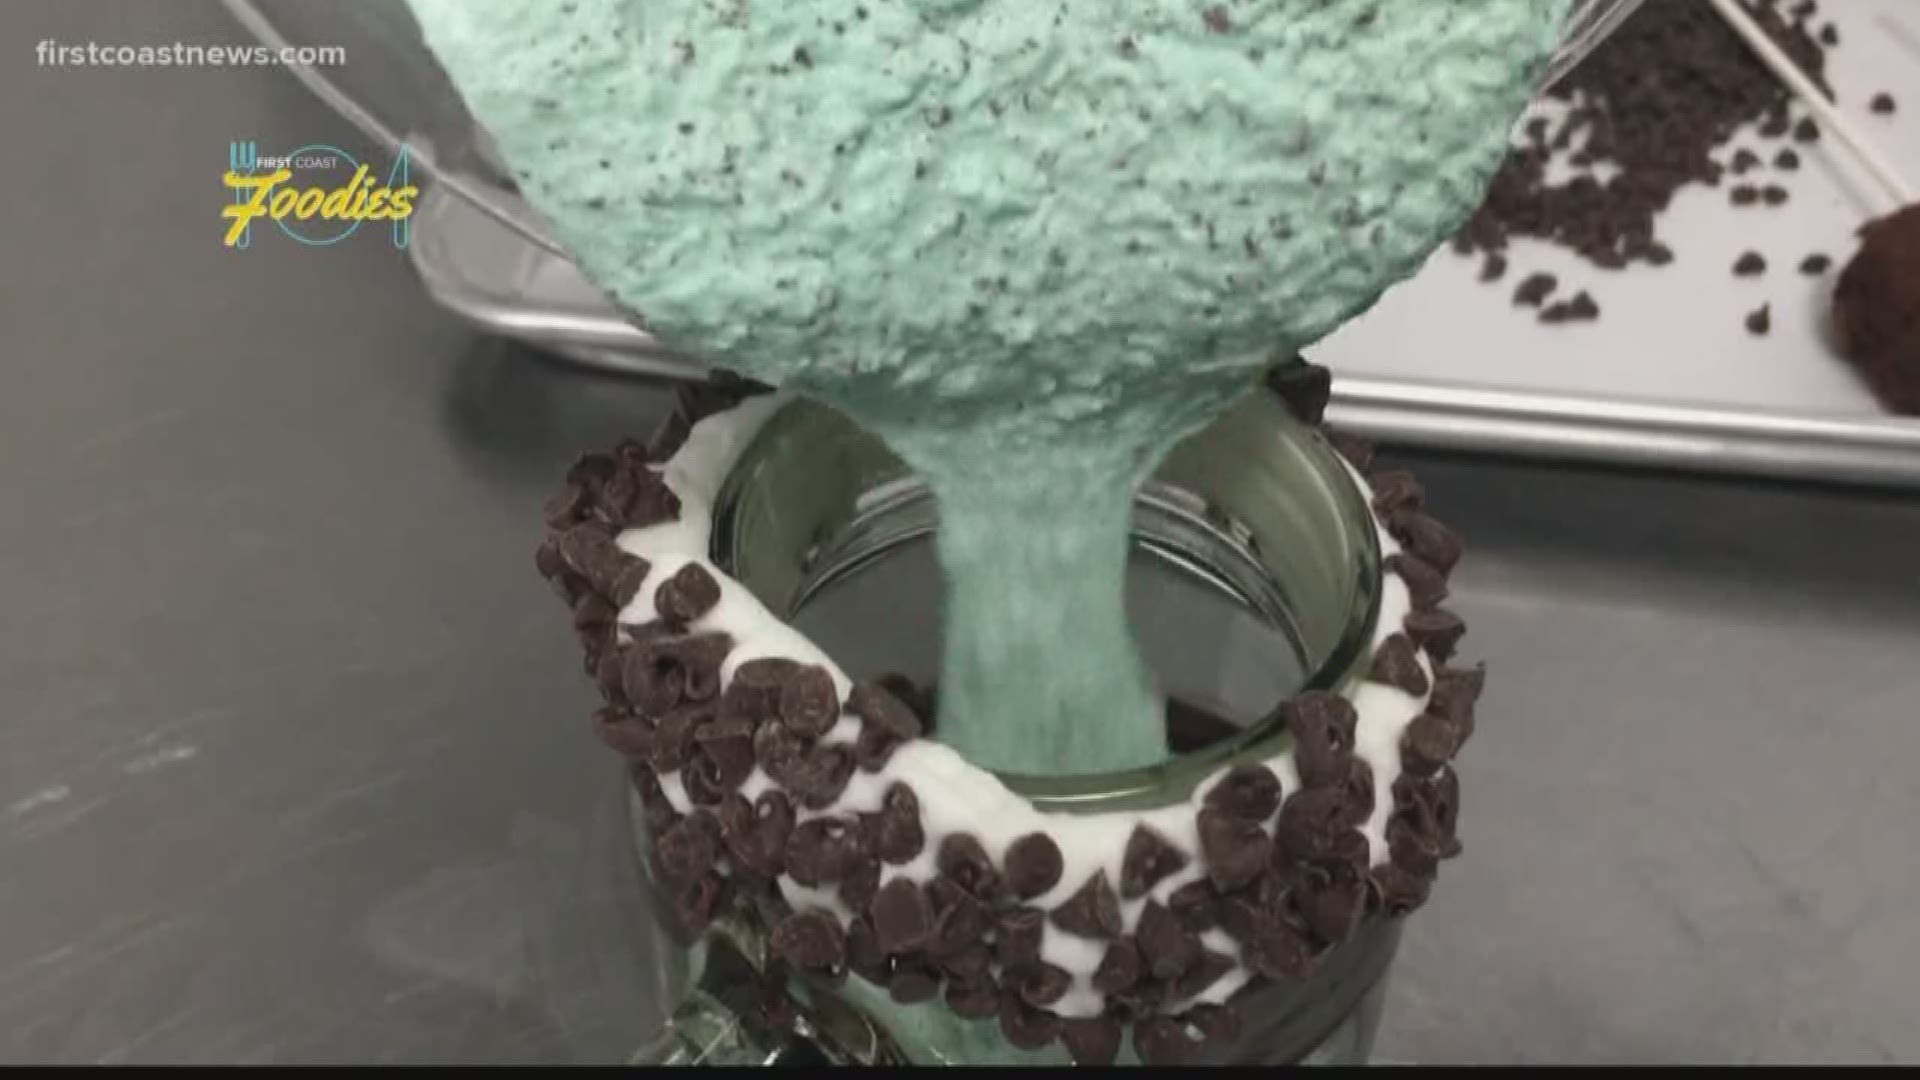 Lucy's in Jacksonville Beach specializes in serving custom cookies, cakes, and milkshakes. It also sells CBD cookies.